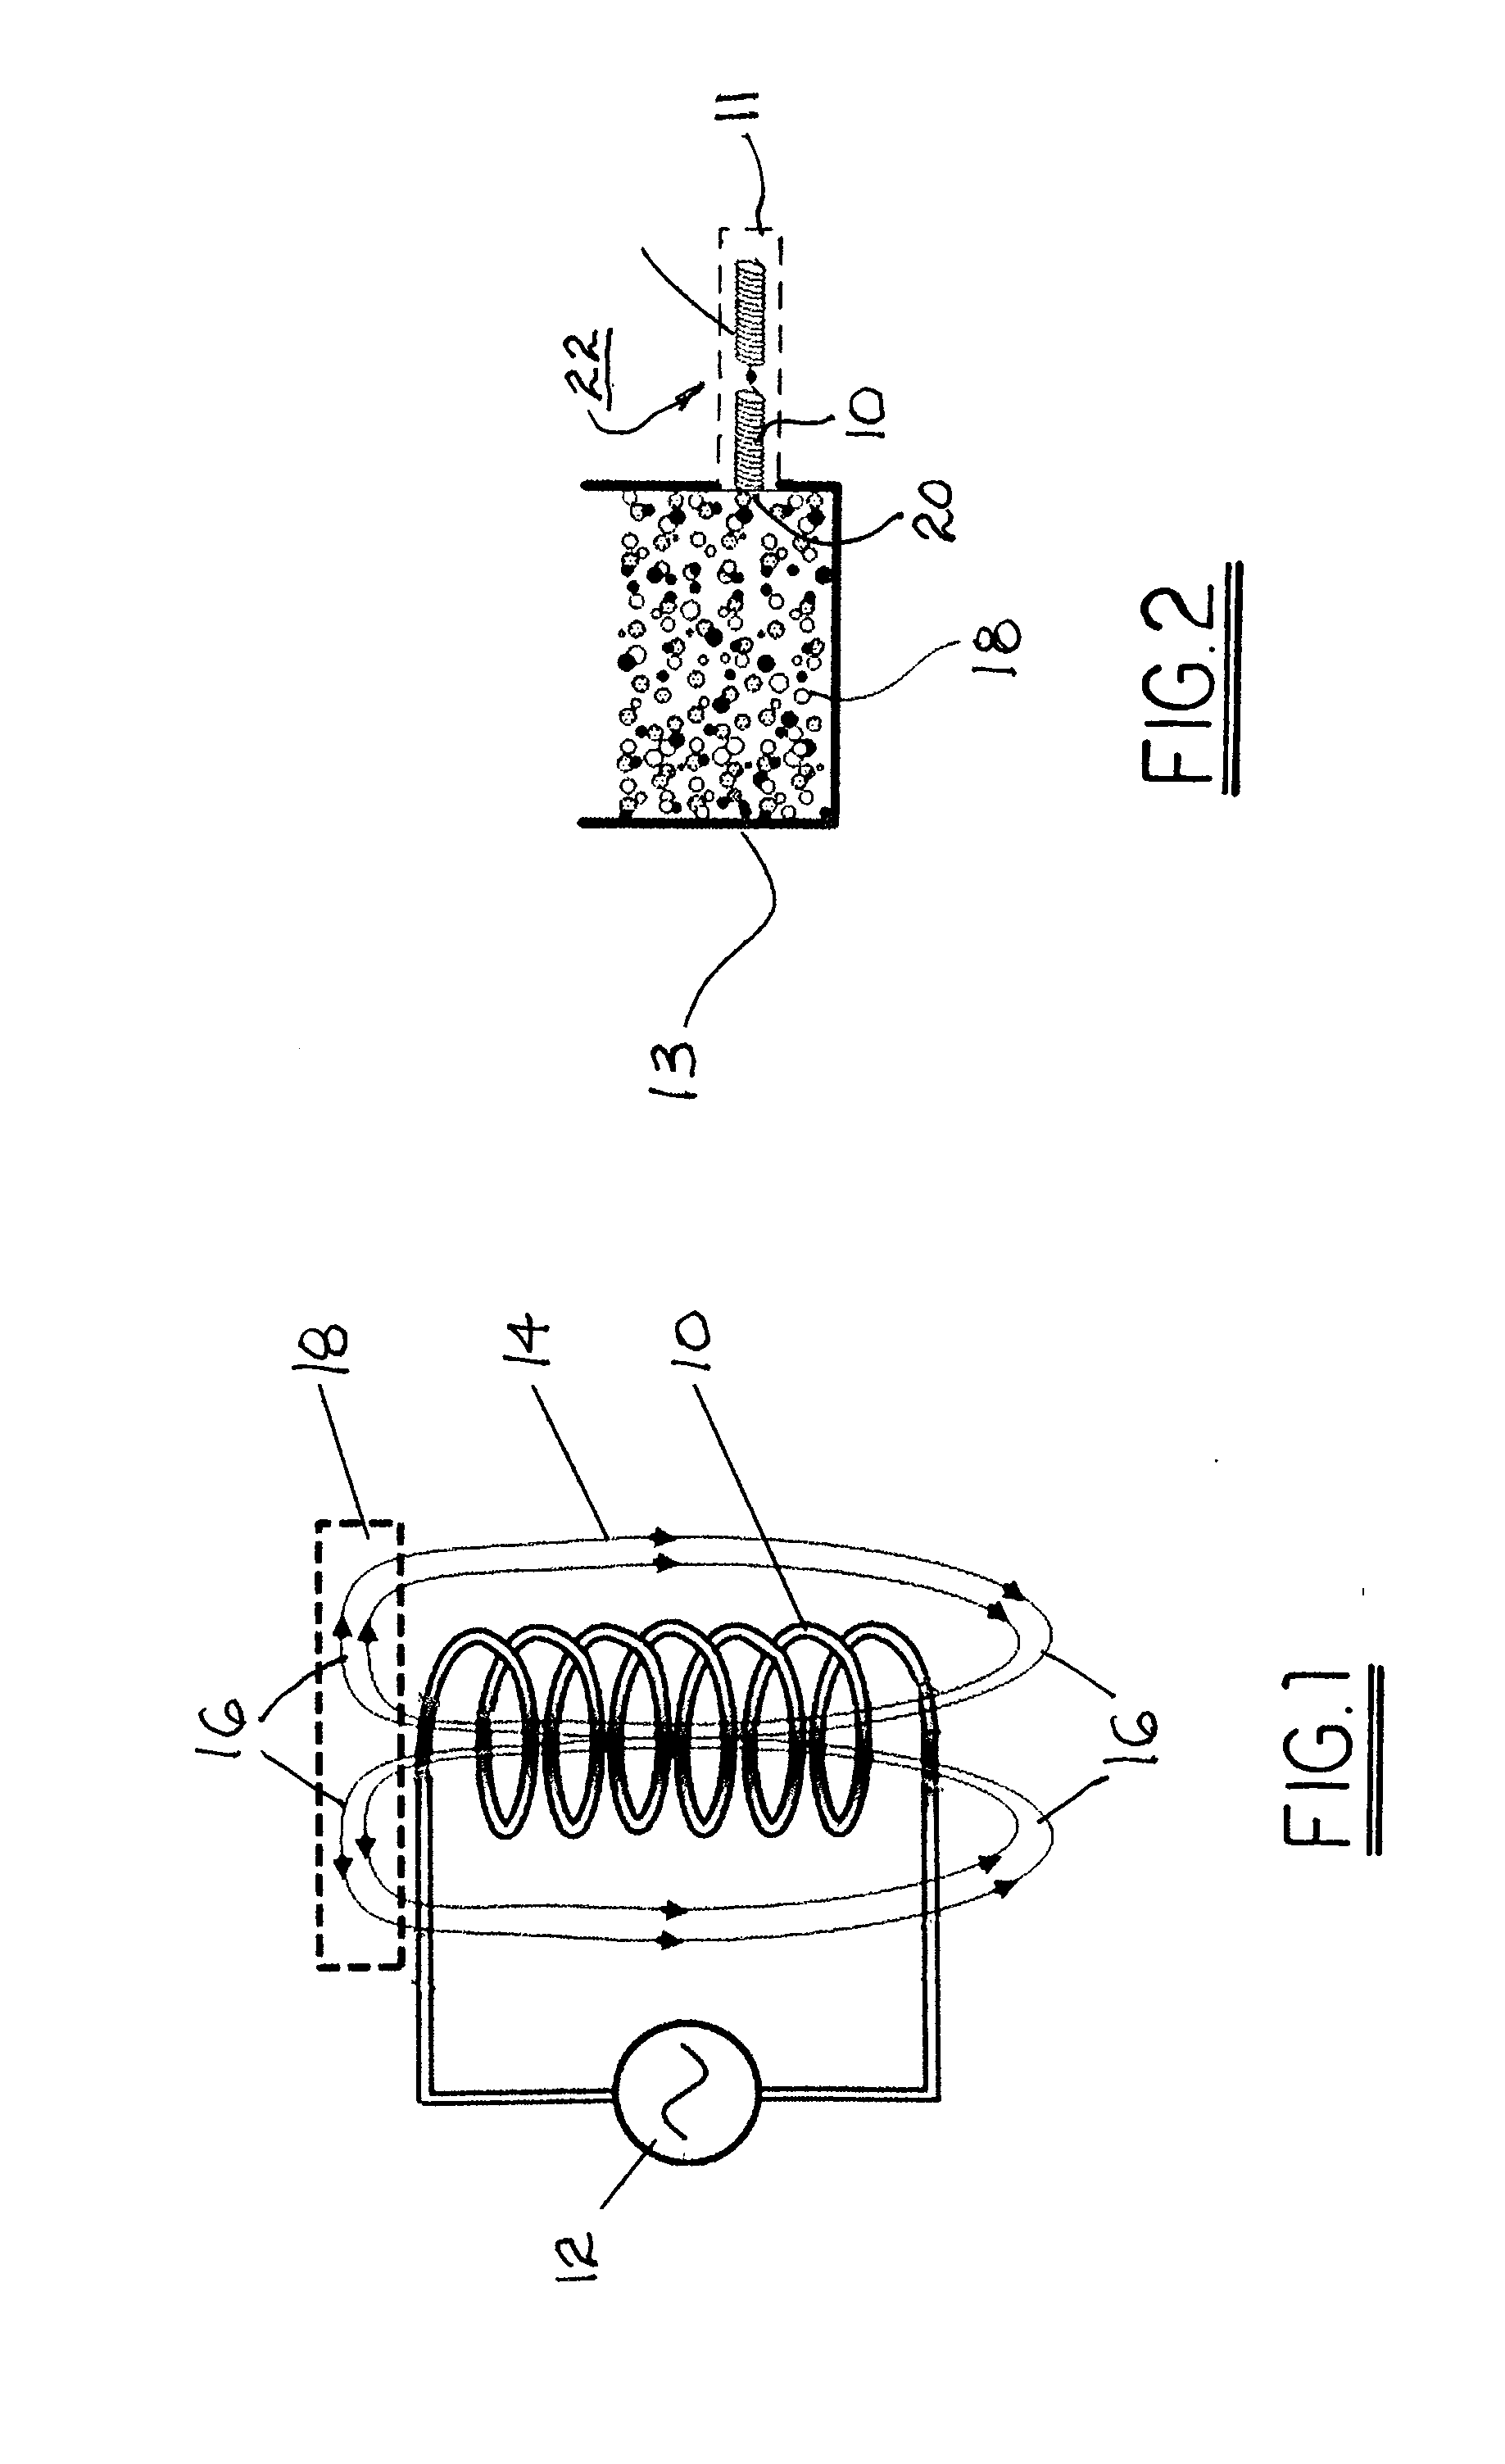 Method and apparatus for measurement and control of magnetic particle concentration in a magnetorheological fluid